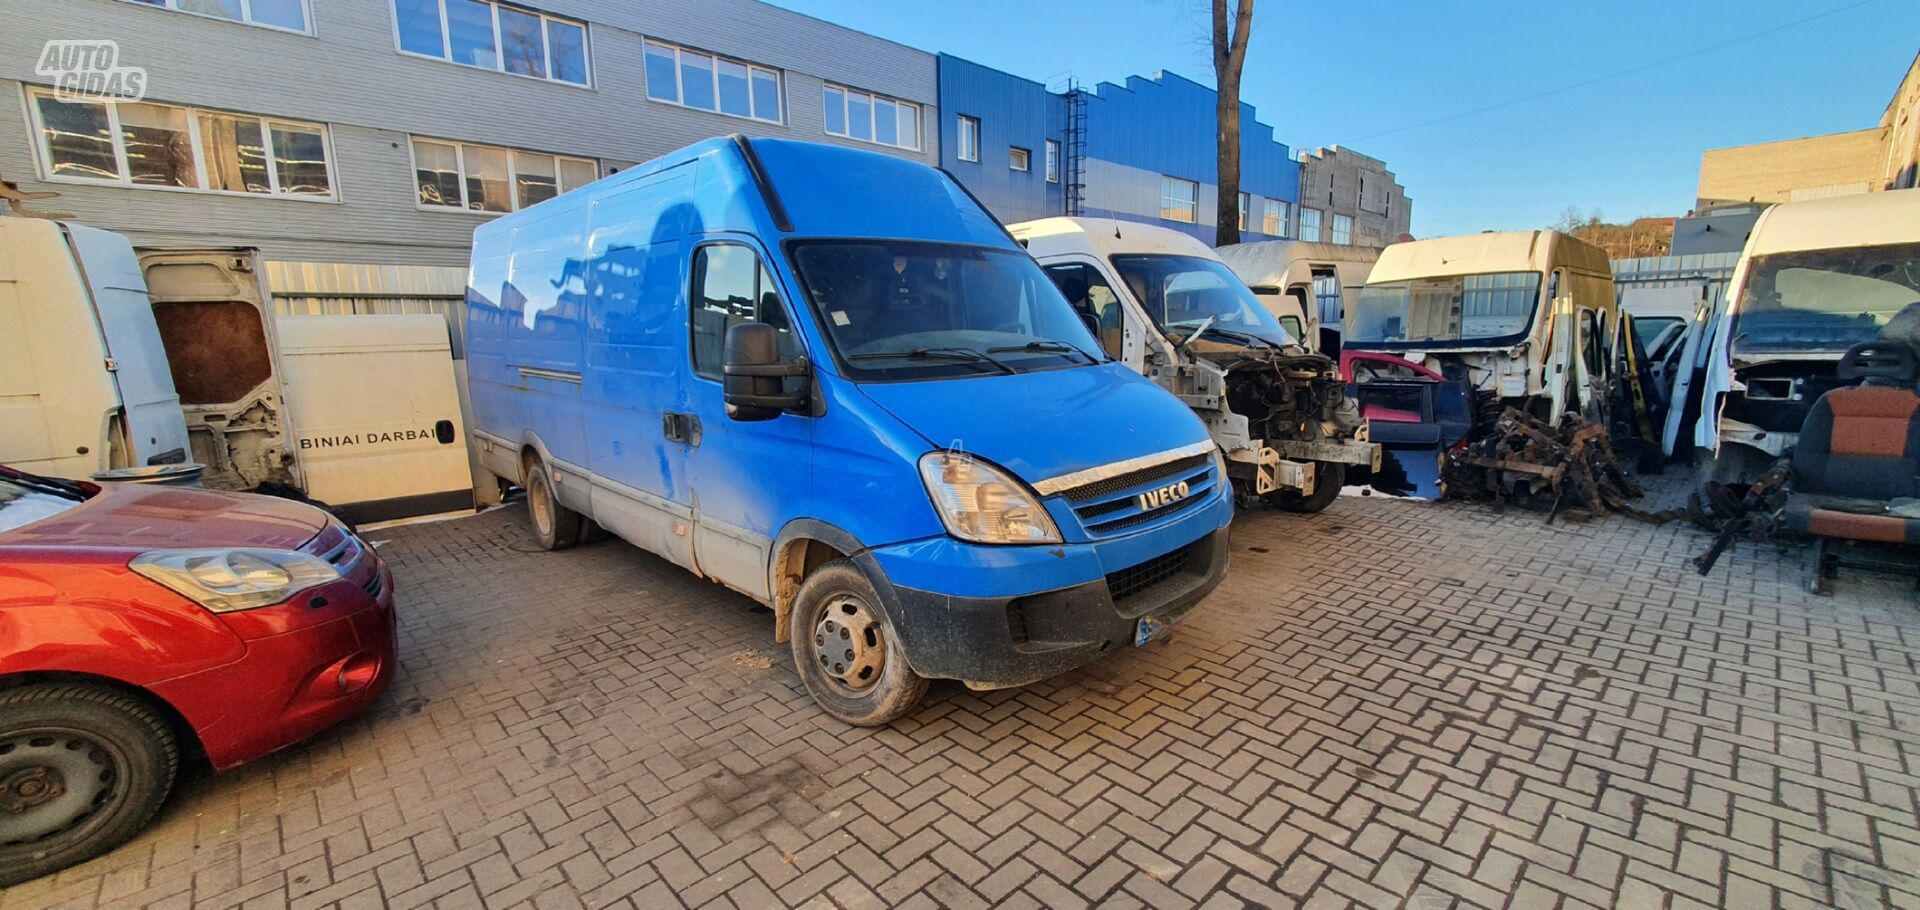 Iveco Daily 2008 m dalys